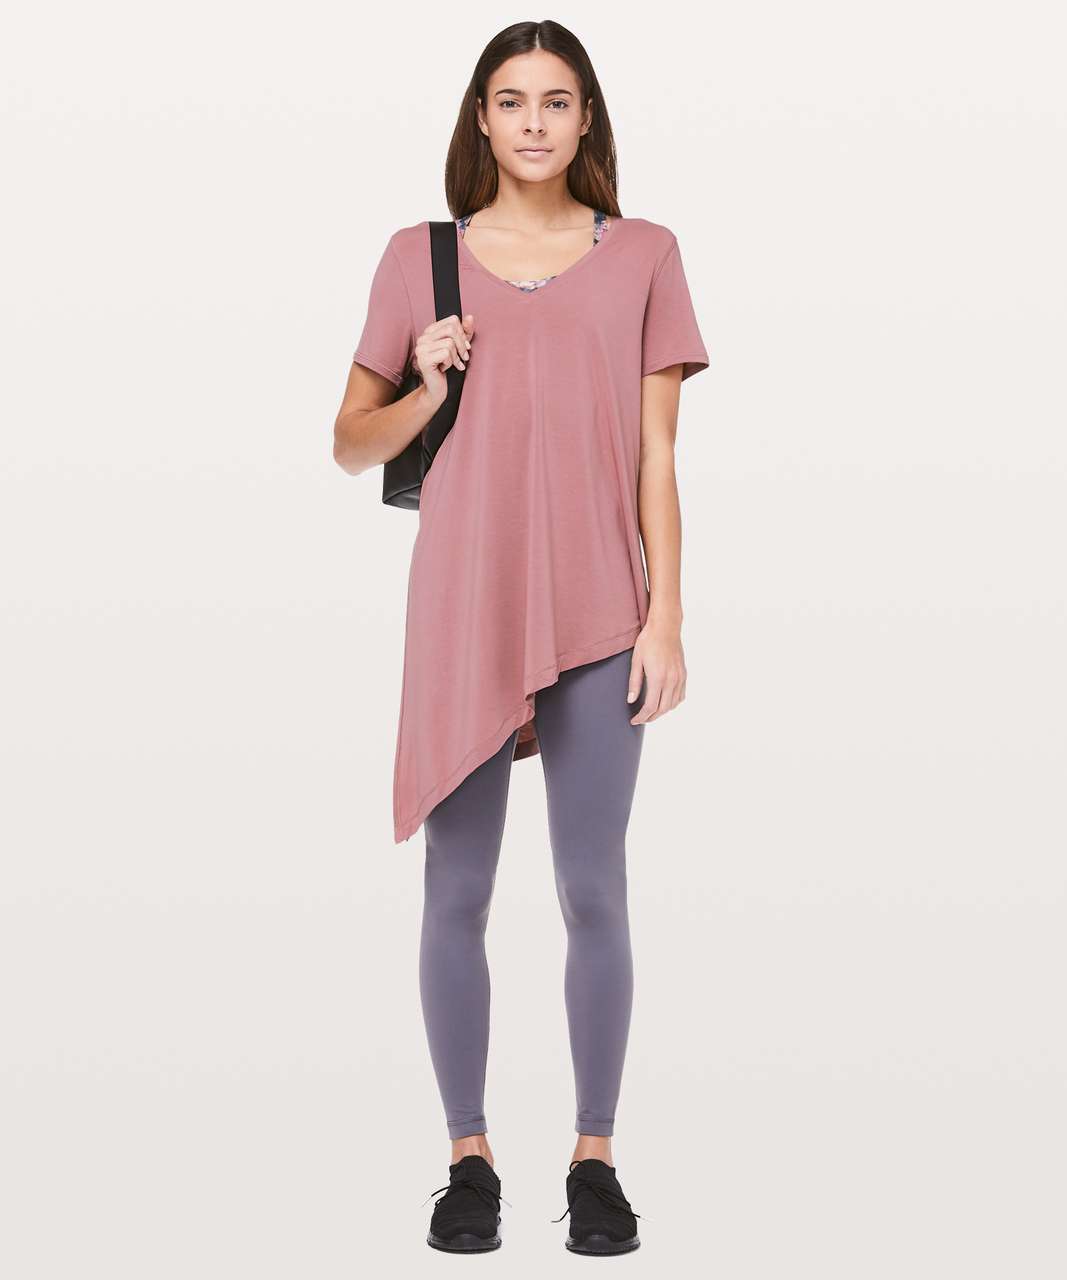 Lululemon To The Point Tee - Quicksand